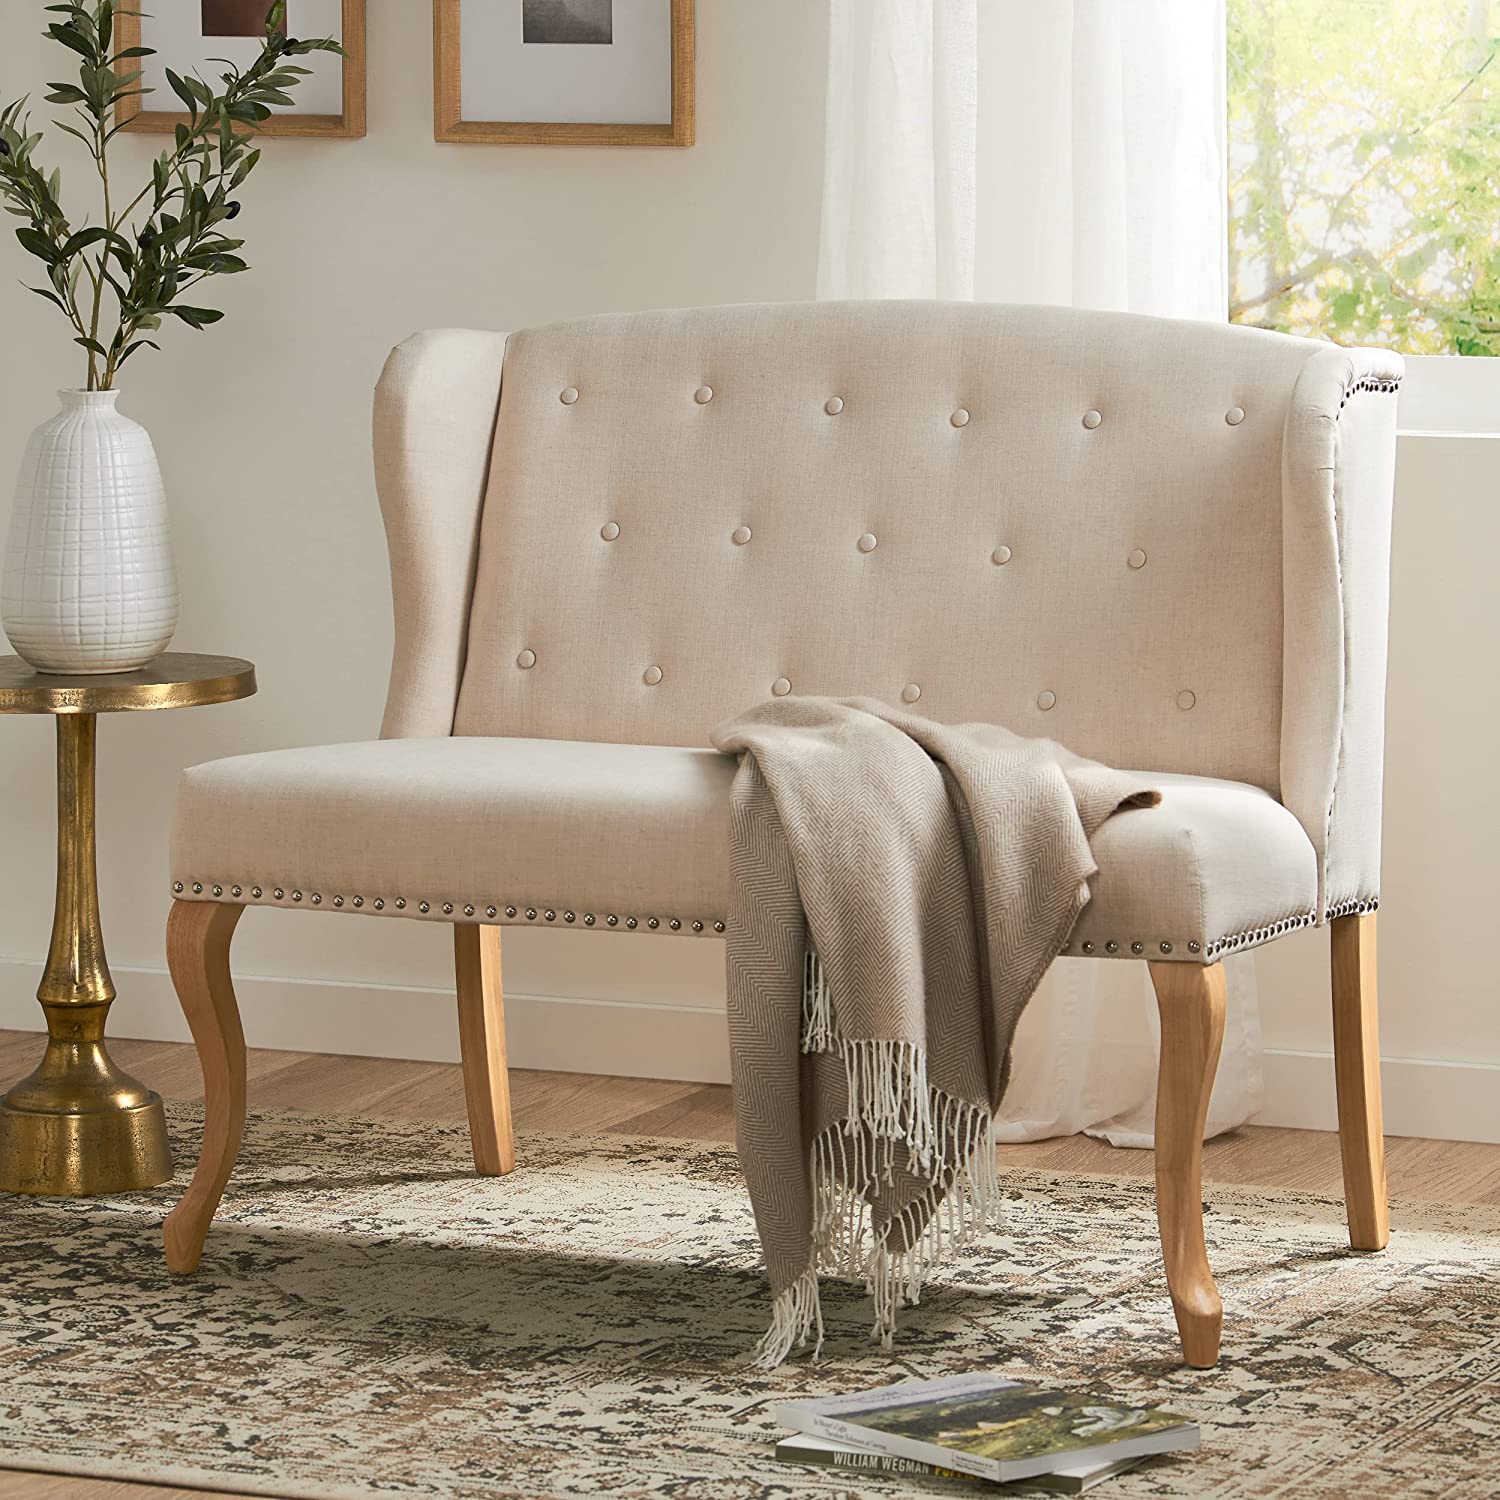 Upholstered Settee for a Cozy Corner